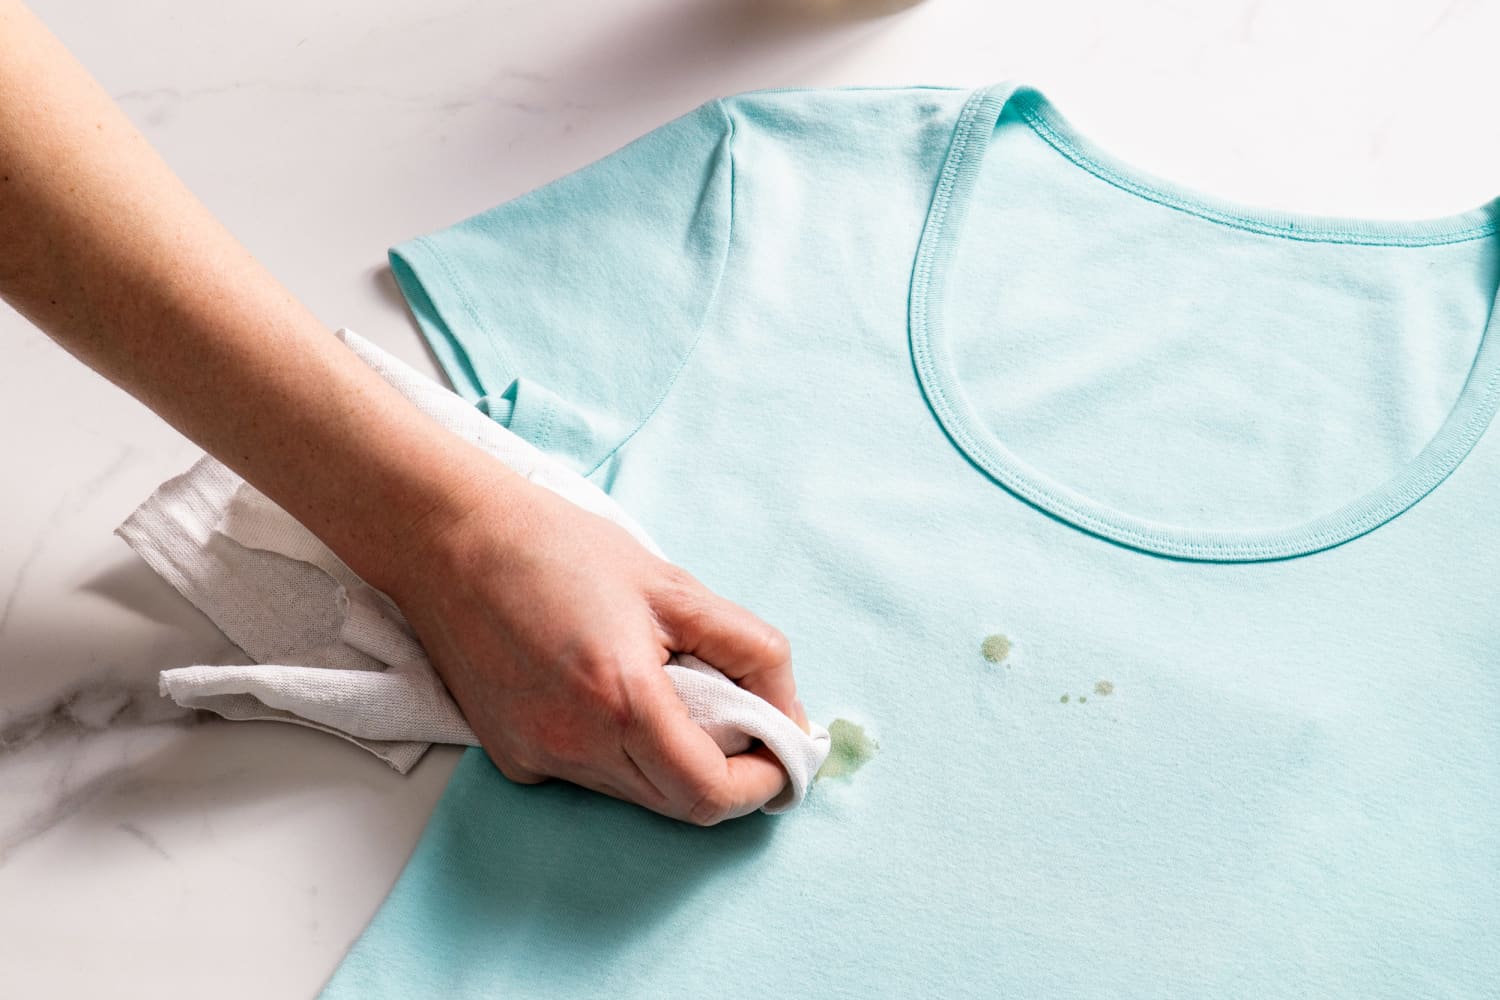 How to Remove Grease Stains, According to Professional Dry Cleaners